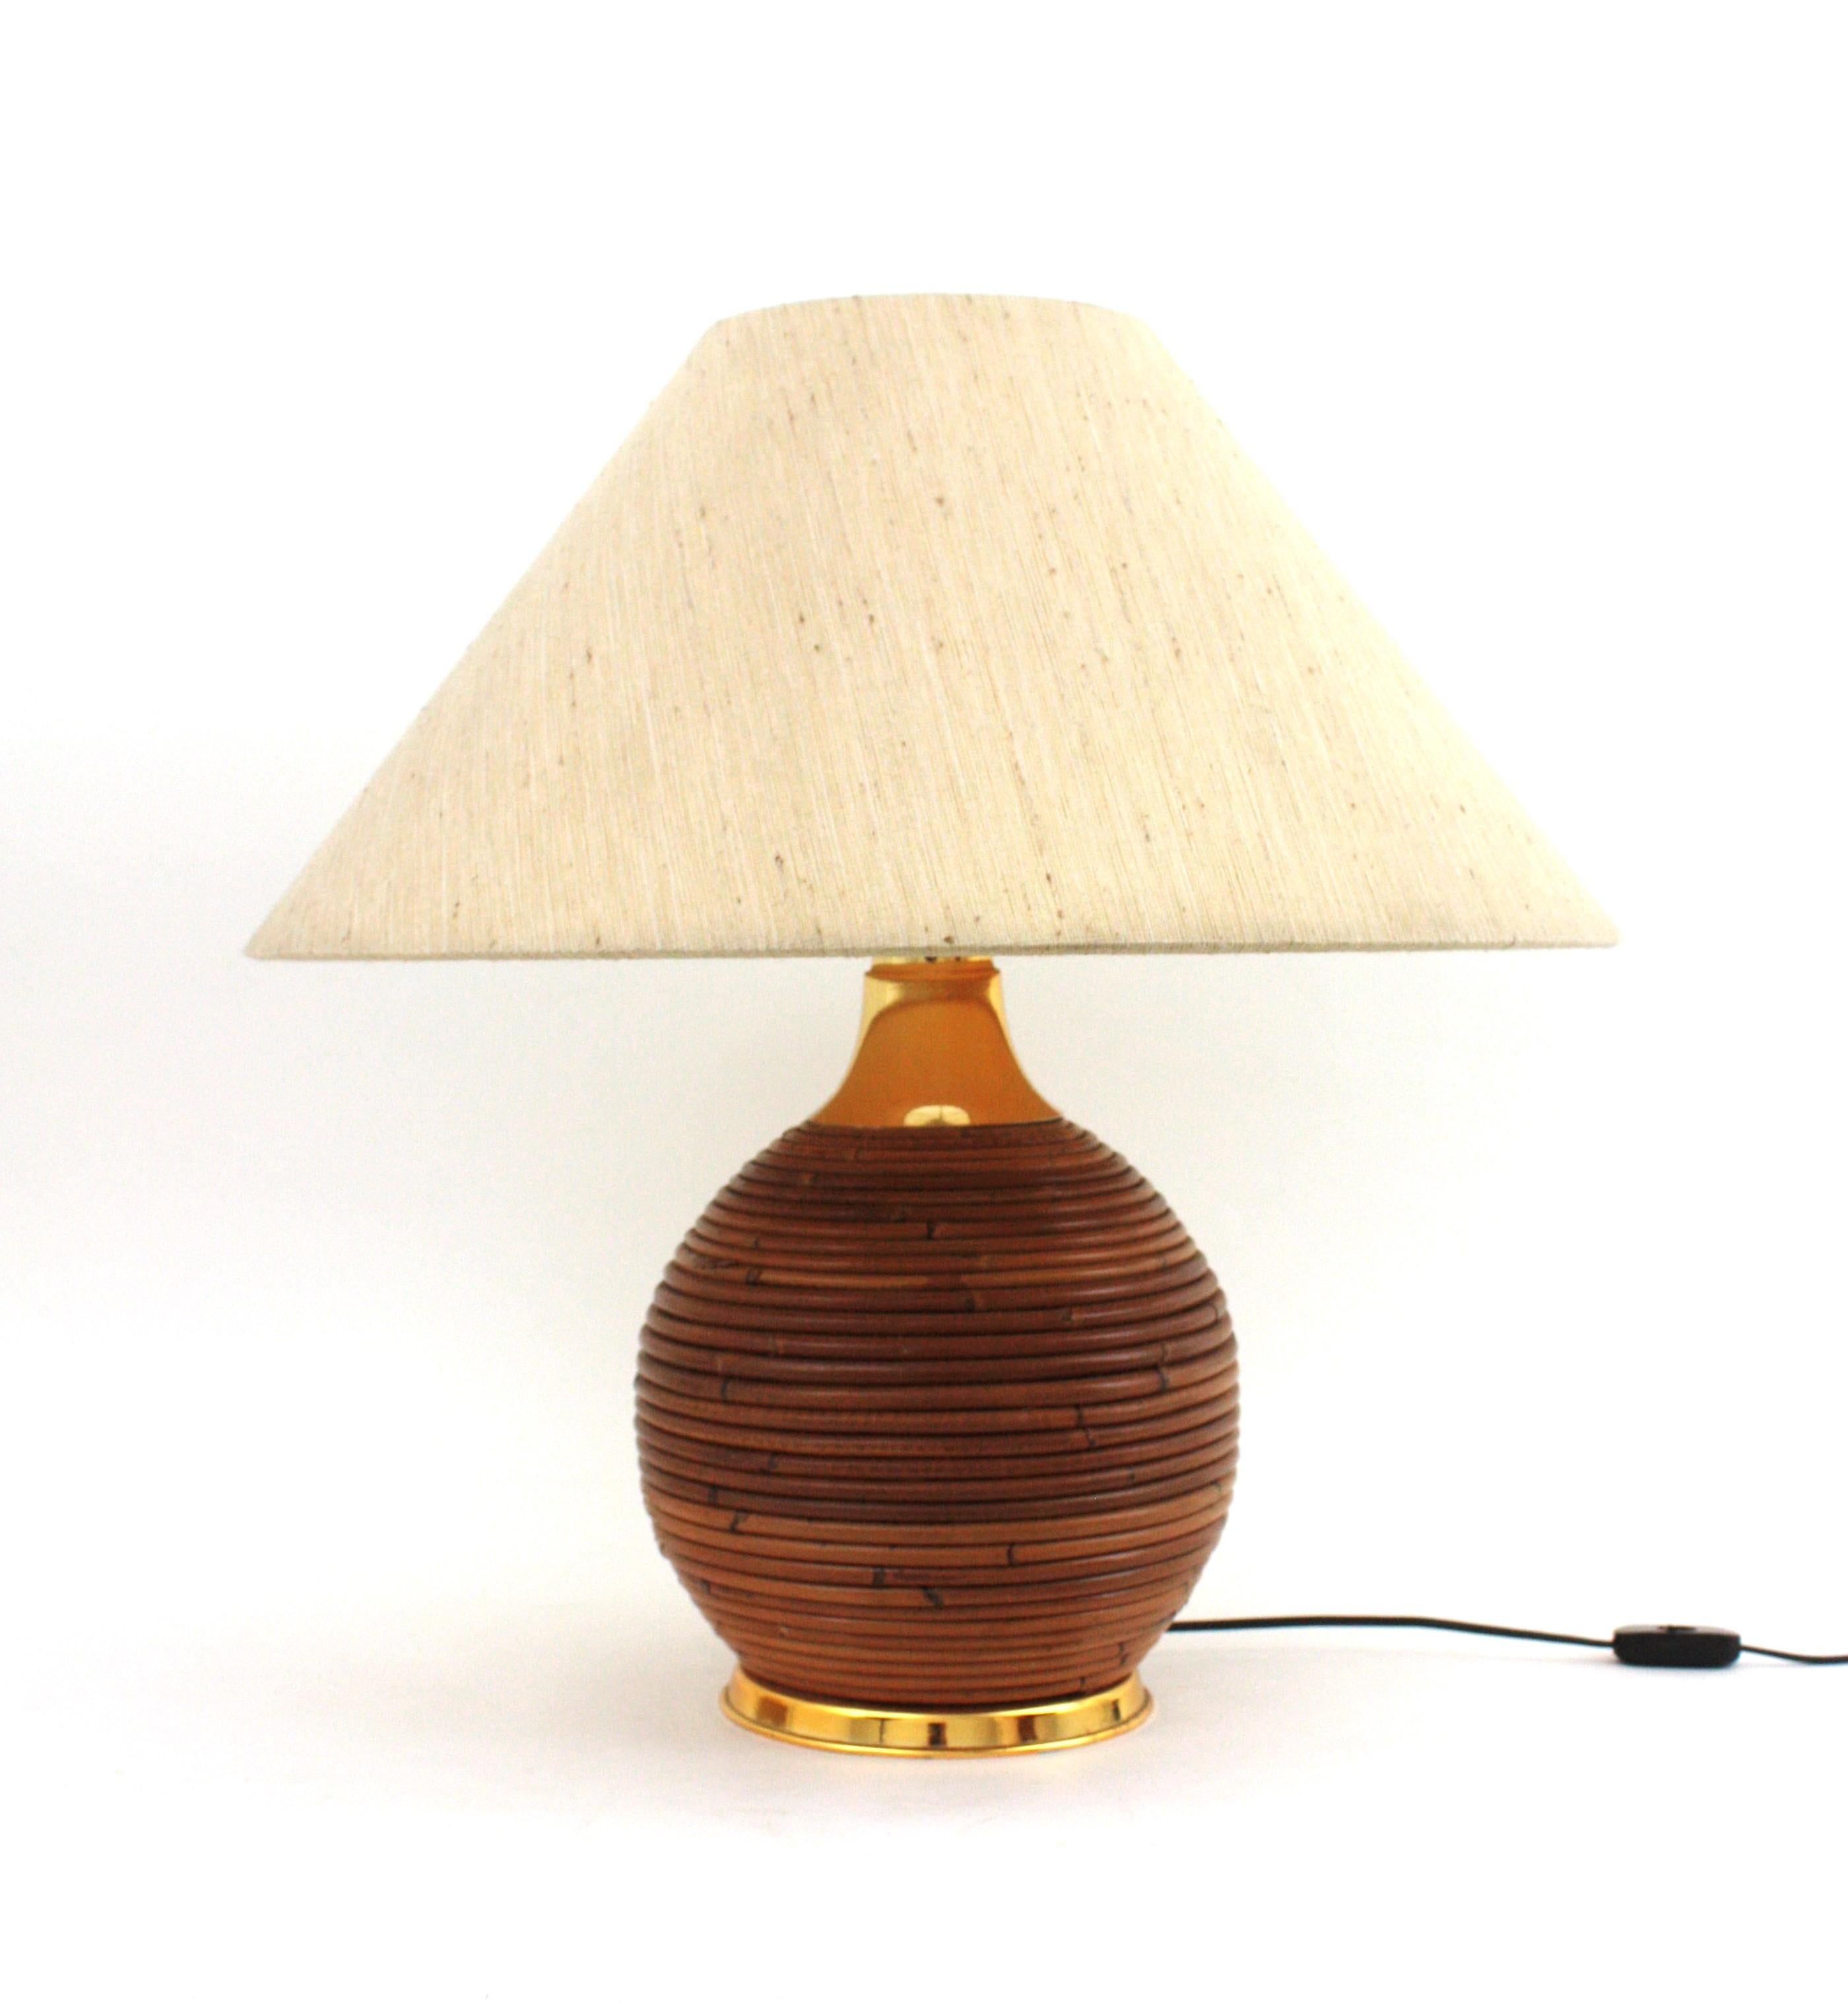 Mid-Century Modern Rattan Pencil Reed Table Lamps with Original Linen Lampshade

Pencil Reed Rattan and Brass Organic Modern Vivai Del Sud Ball Table Lamp, Italy, 1970s
This Pencil Reed Rattan Organic Modern Table Lamp has a design inspired in